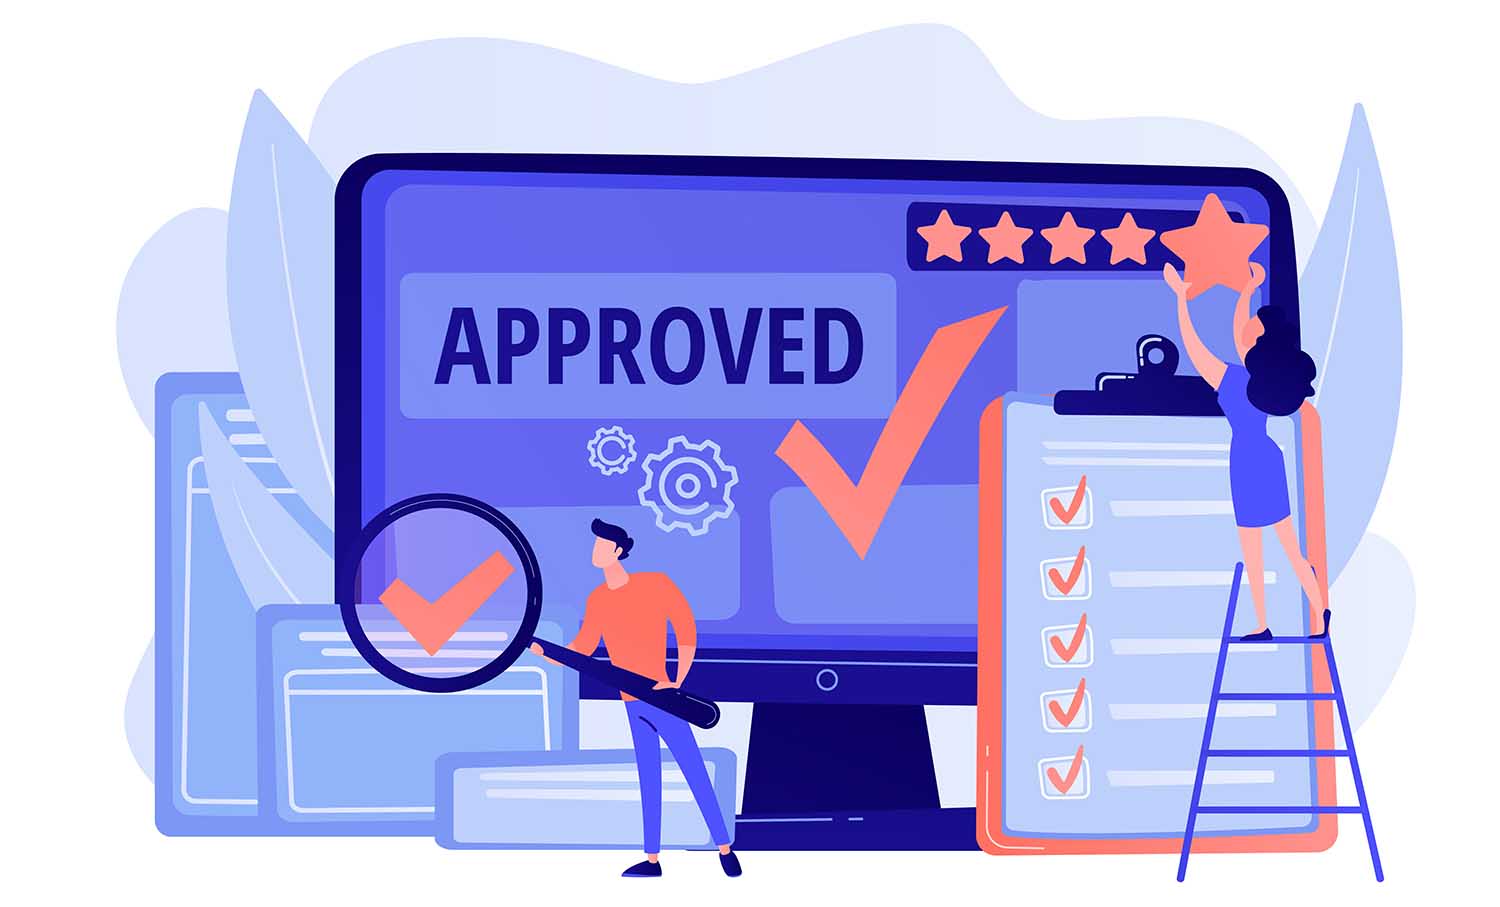 Review process and approval